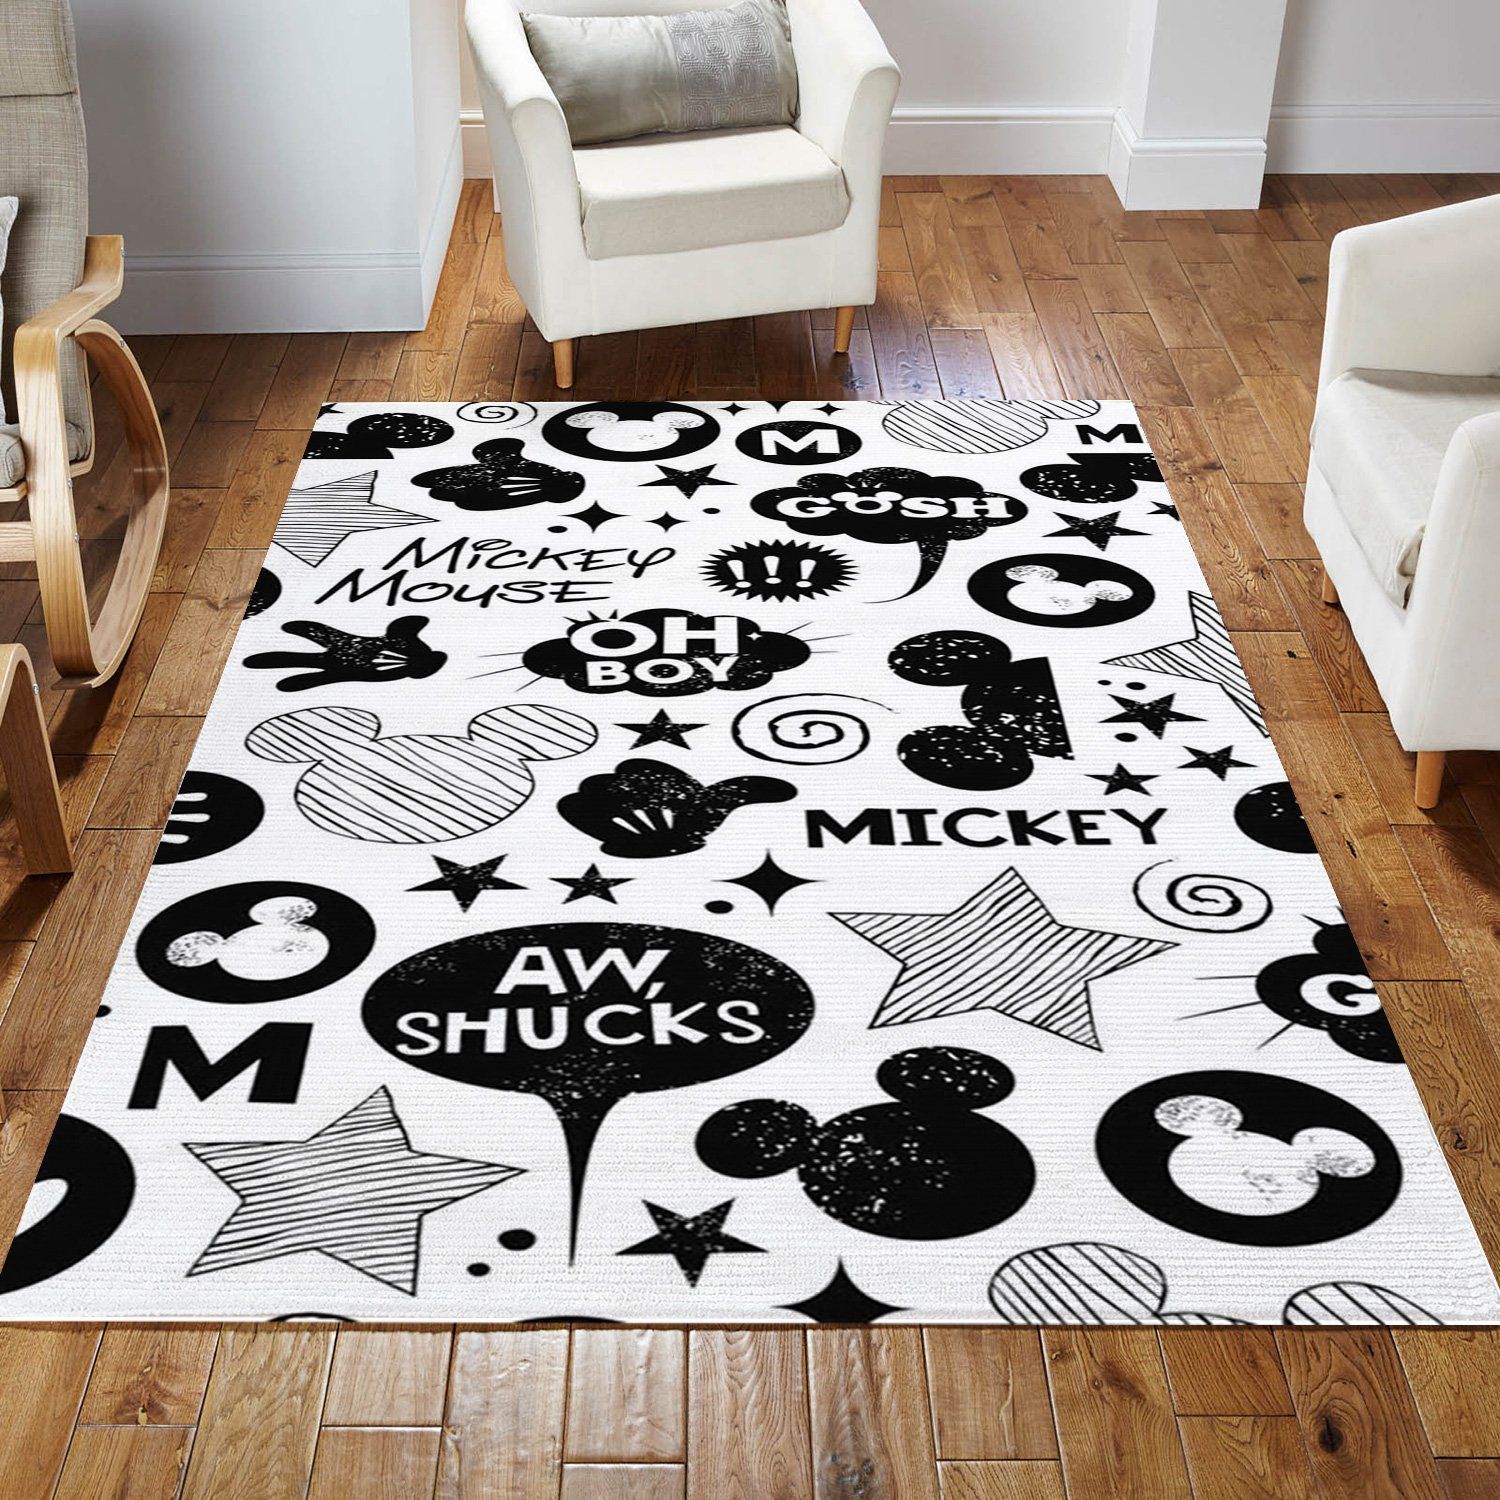 Minnie Mouse Black And White Area Rug For Christmas Living Room Rug Family Gift US Decor - Indoor Outdoor Rugs 3